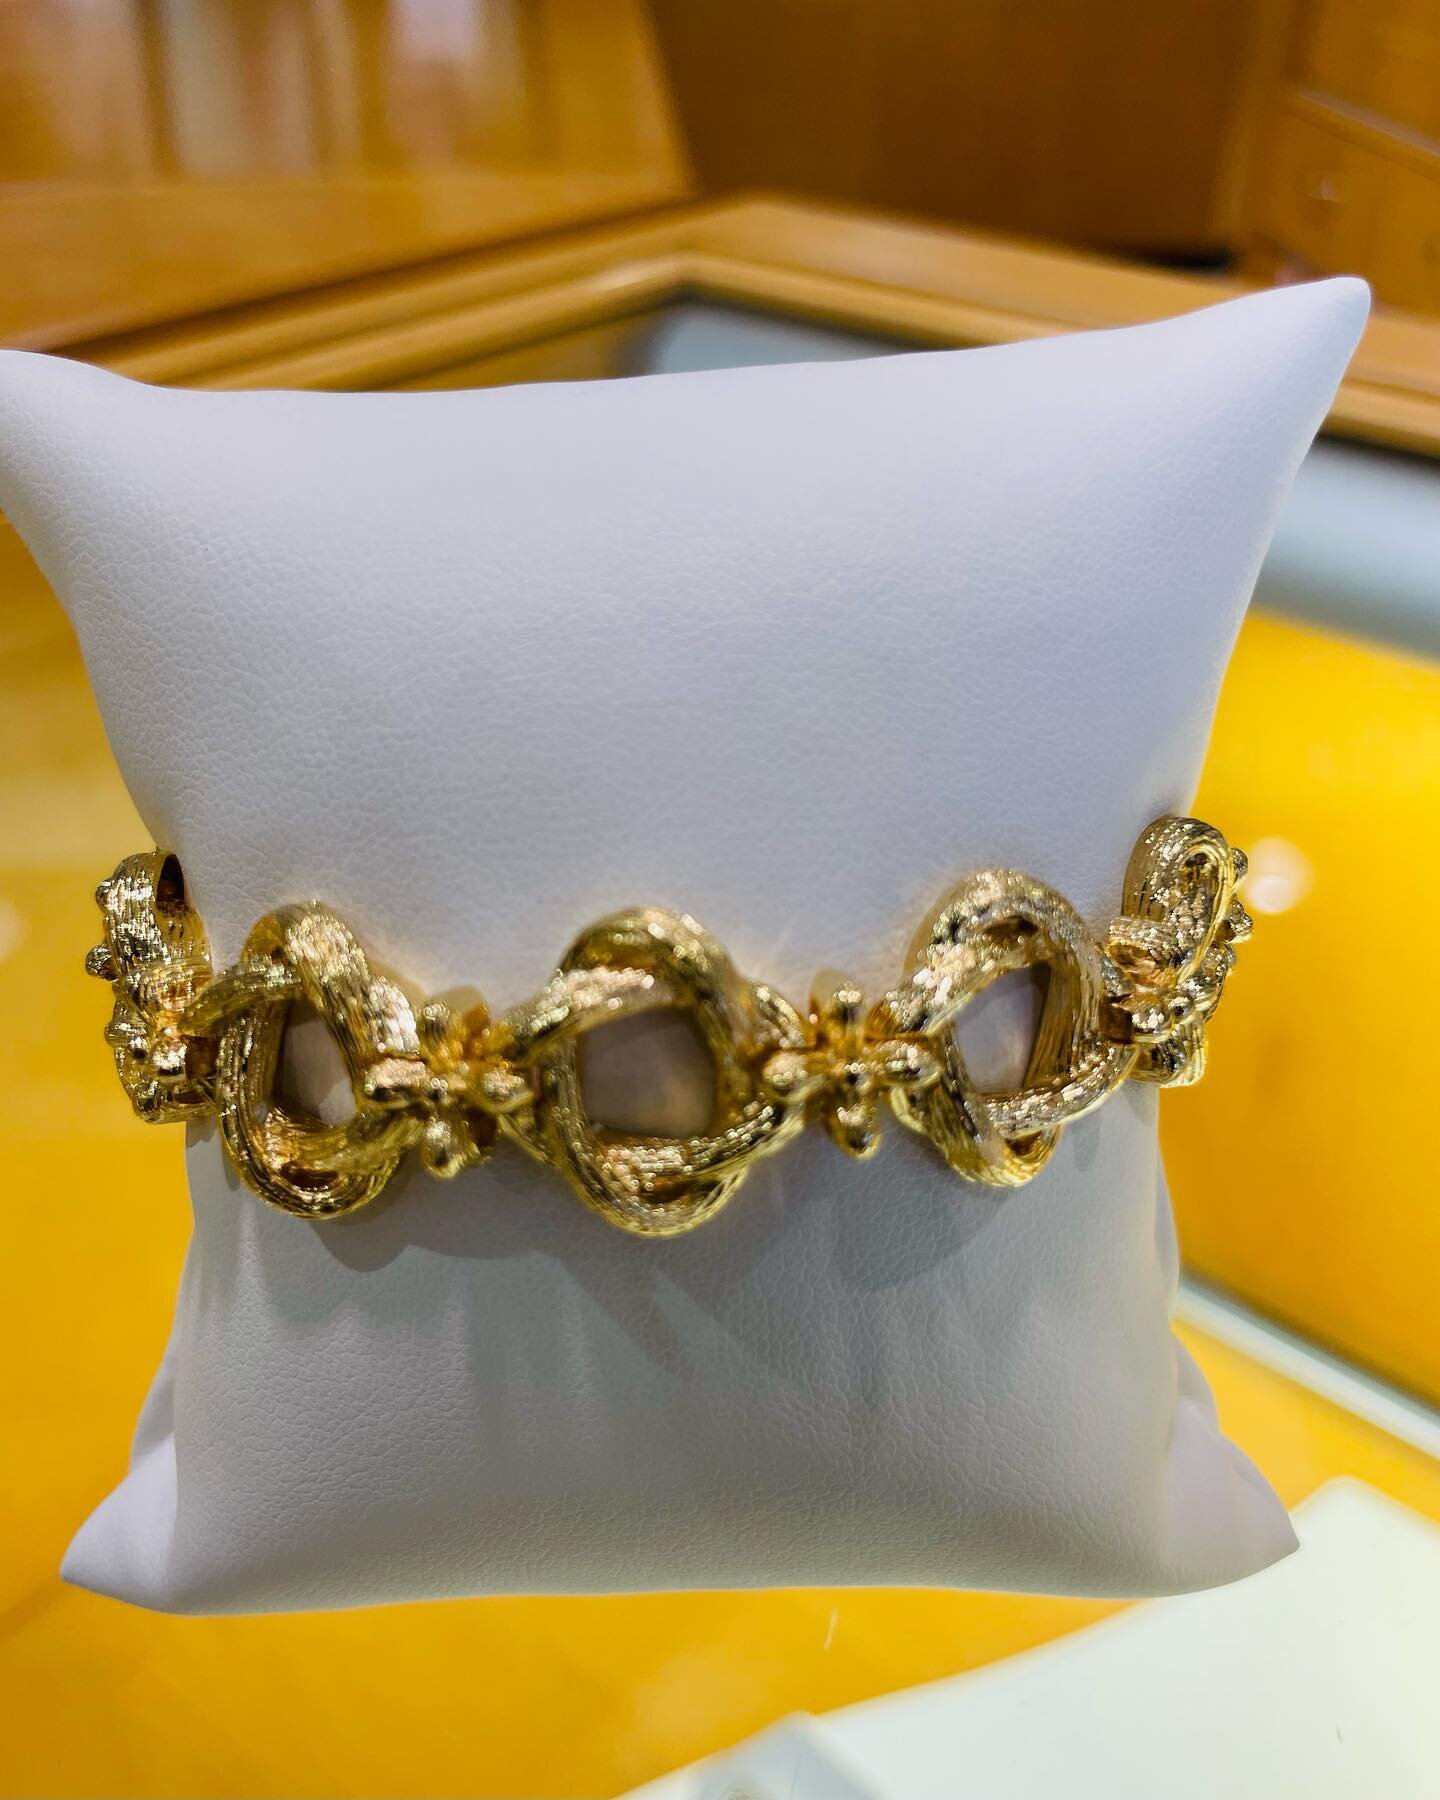 We carry various estate pieces just like this  beautiful gold link bracelet. 

#estatesale #estatesalefinds #gold #finejewelry #jaysfinejewelry